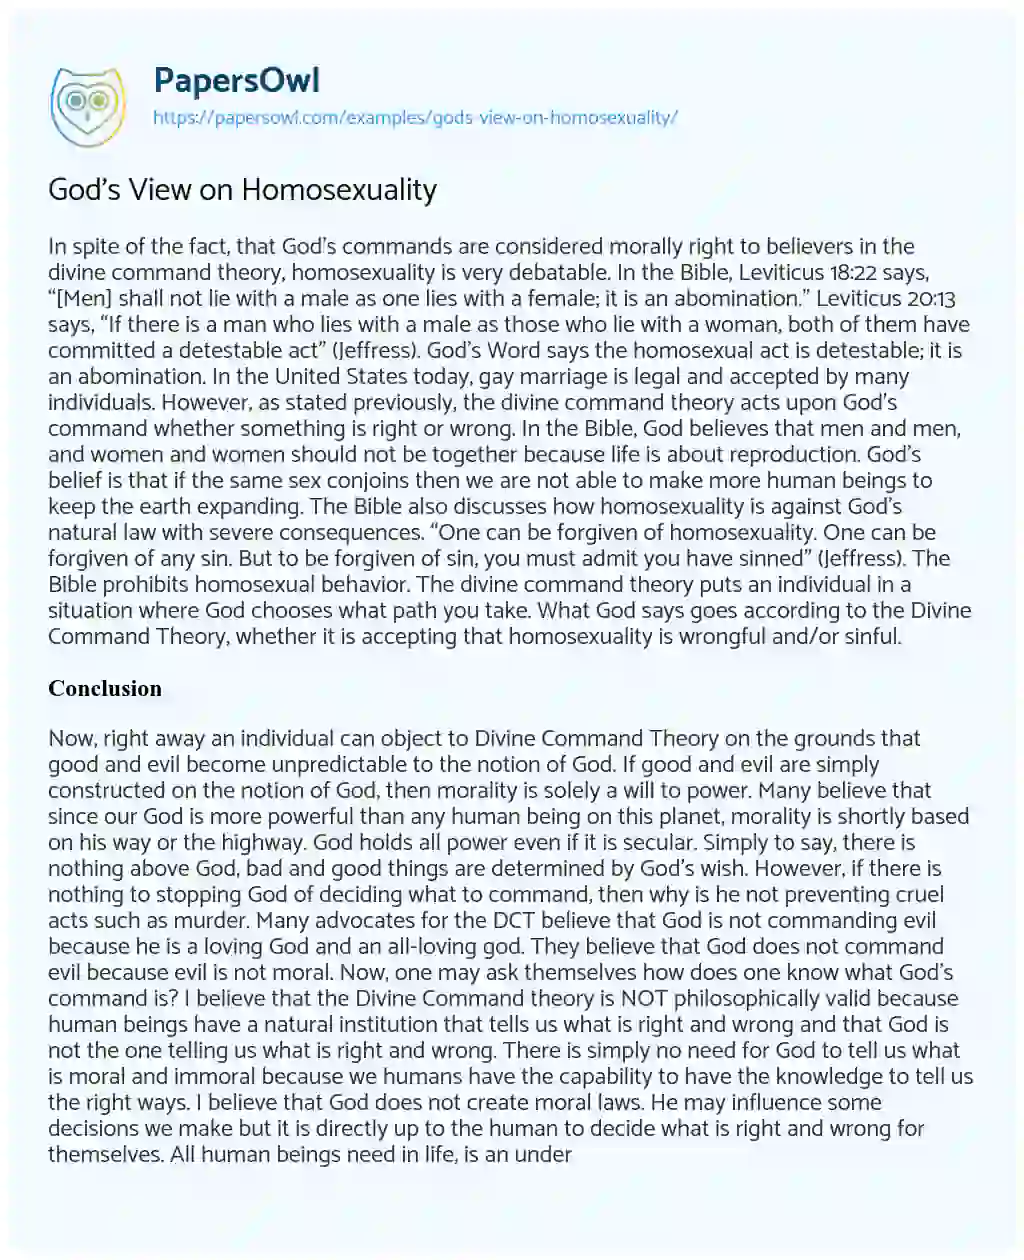 God’s View on Homosexuality essay